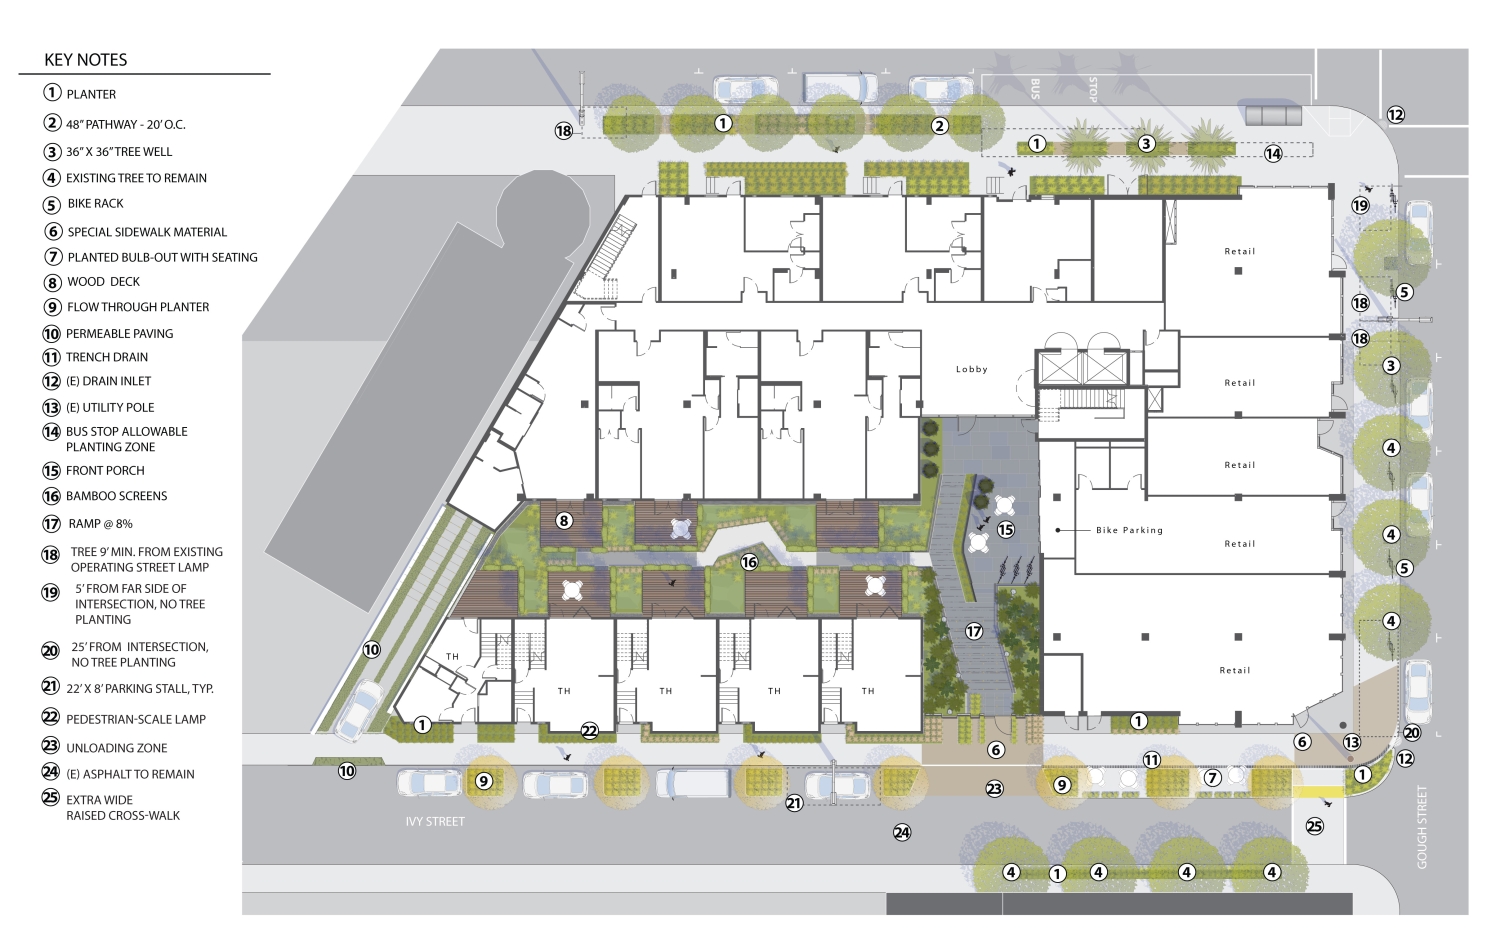 Site plan of 300 Ivy in San Francisco, CA.